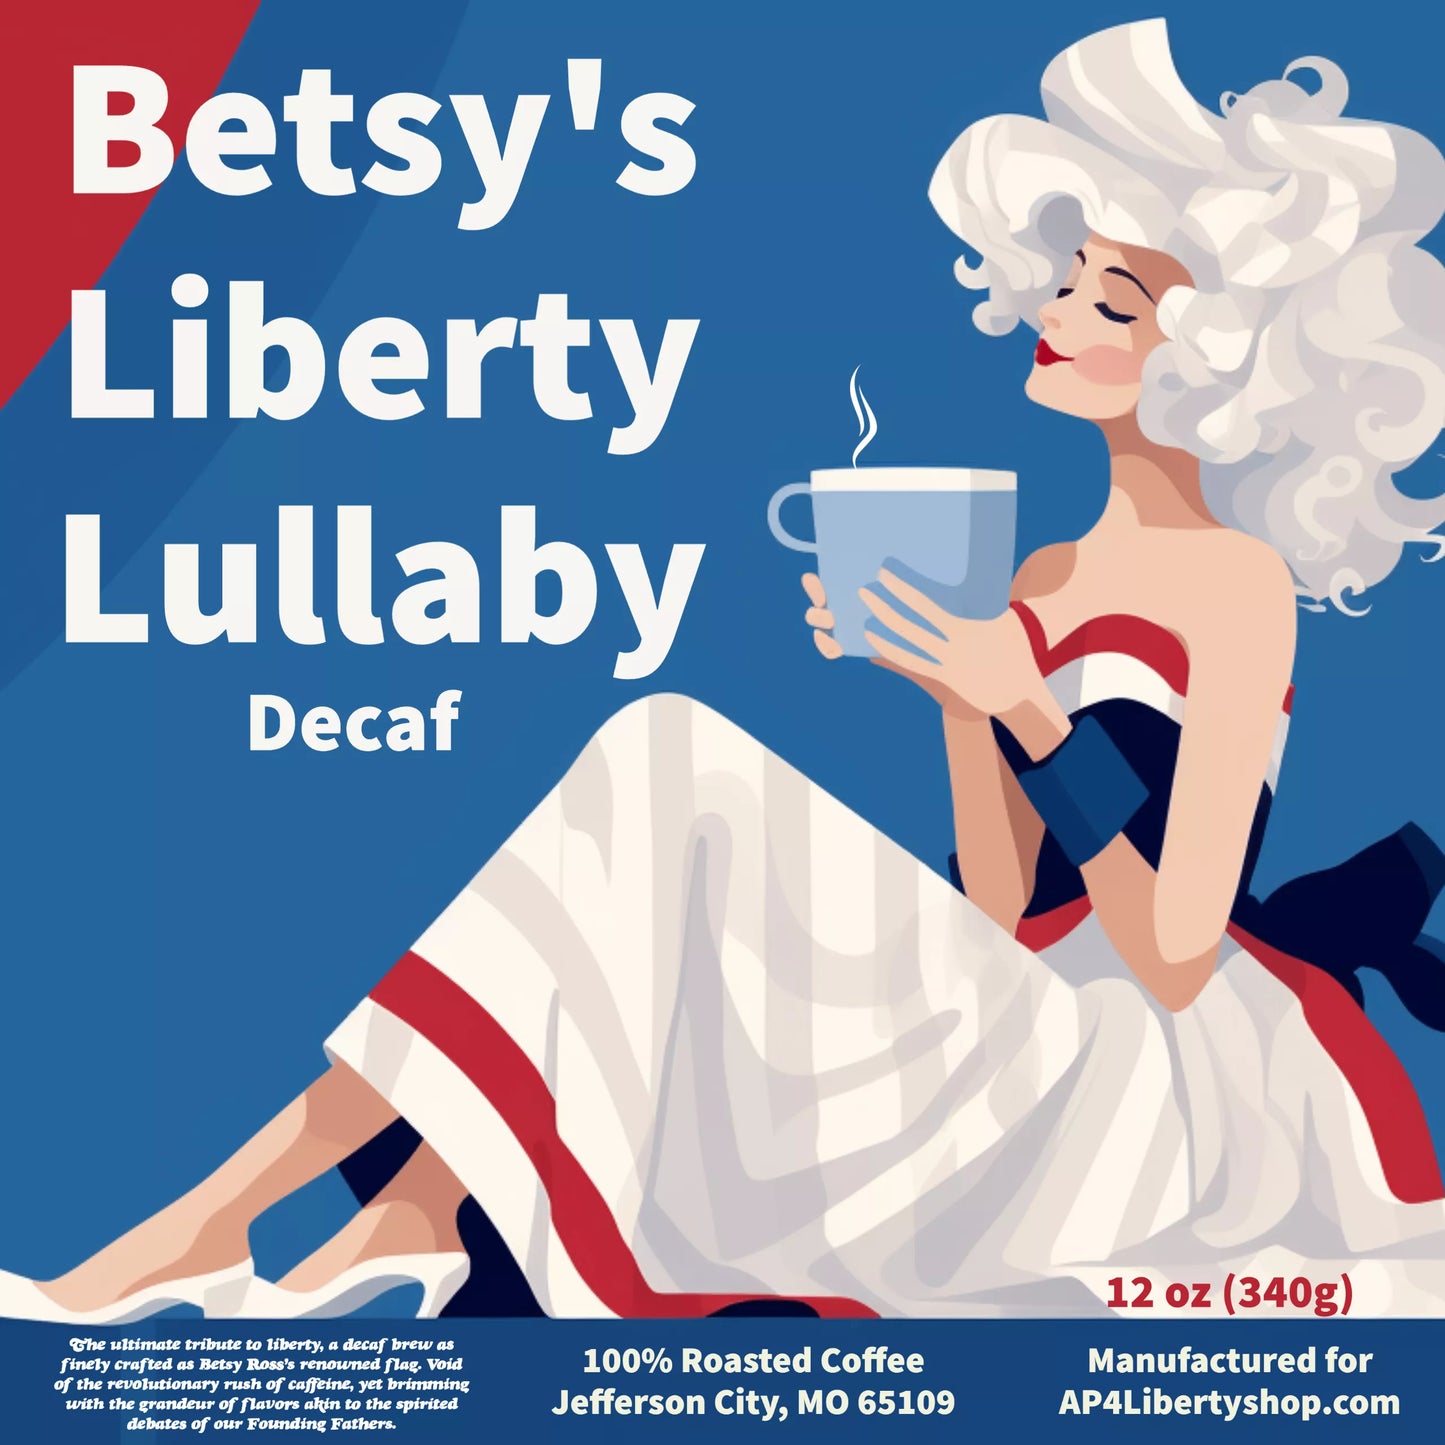 Betsy's Liberty Lullaby